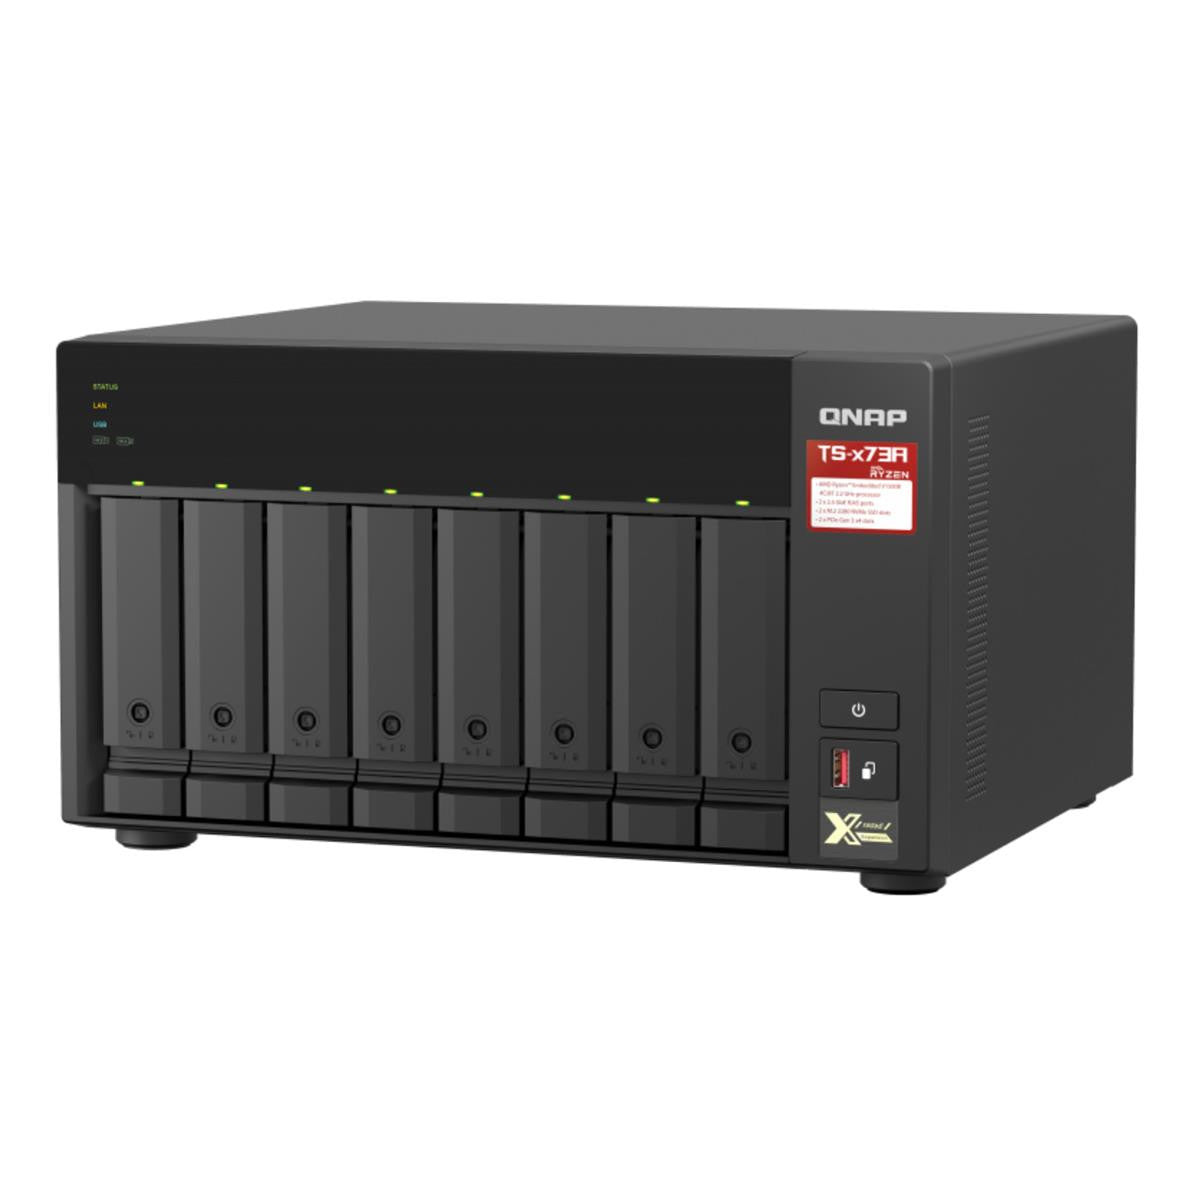 QNAP TS-873A 8-BAY NAS with 32GB DDR4 RAM and 48TB (8x6TB) Seagate Ironwolf NAS Drives Fully Assembled and Tested